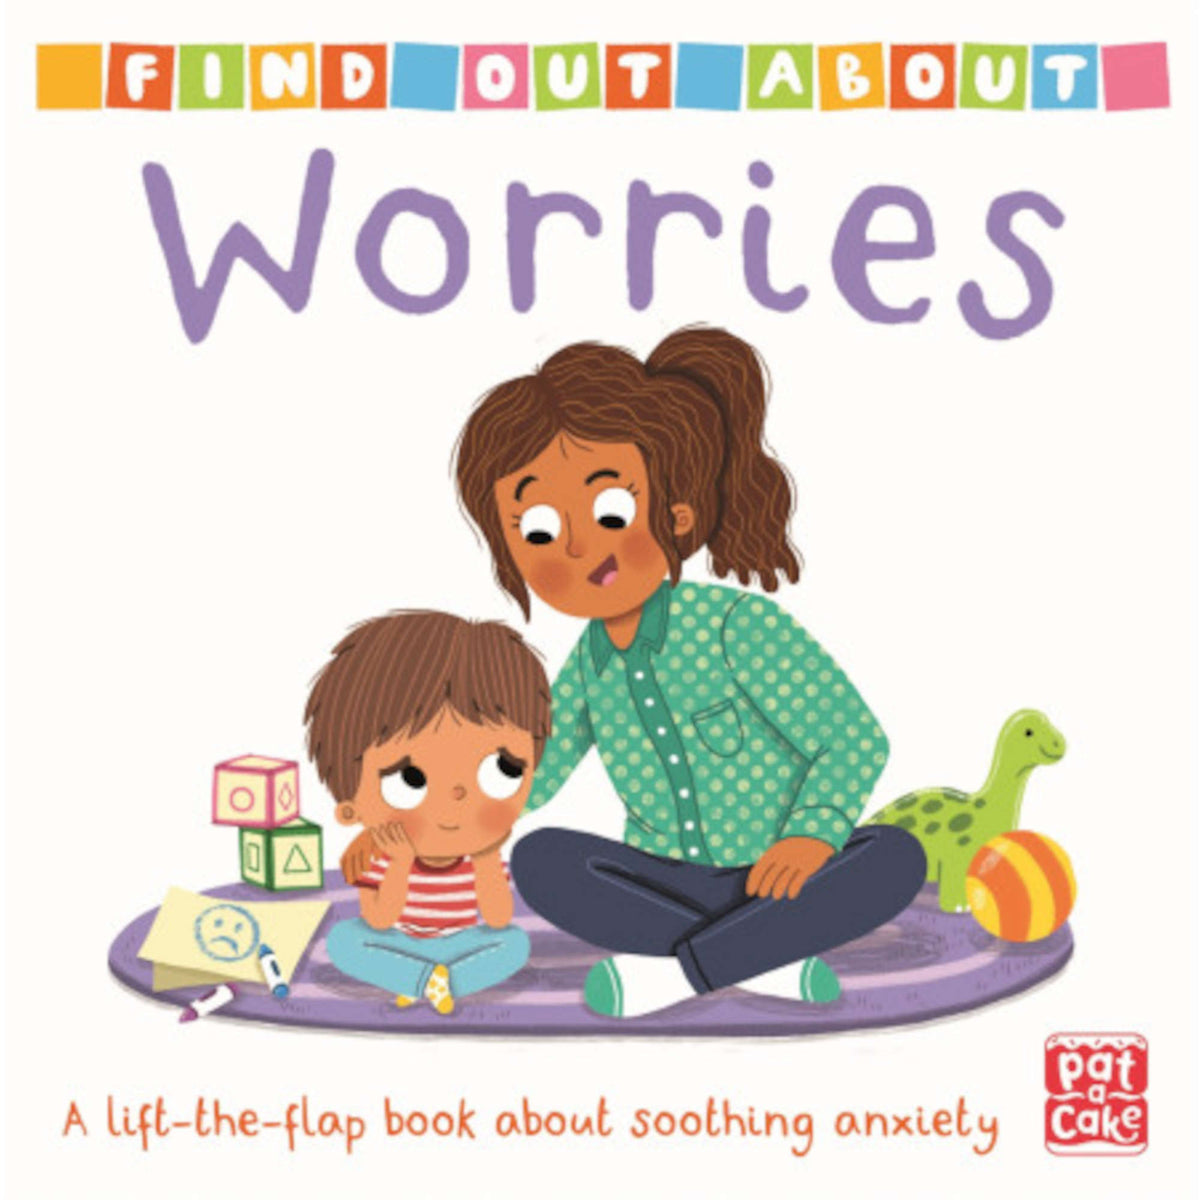 Find Out About: Worries